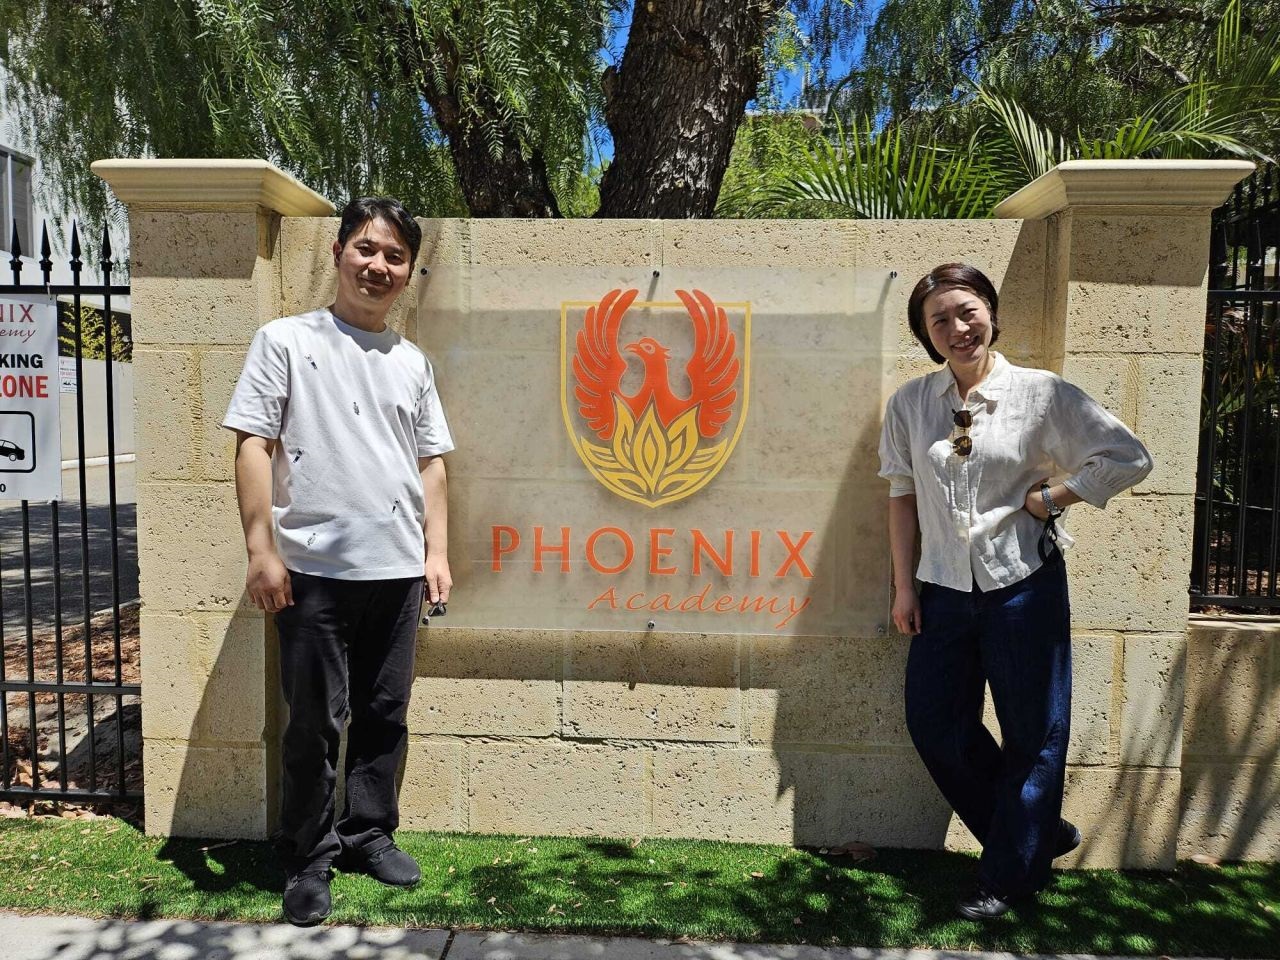 Two South Korean students stand out the front of Phoenix Academy sign